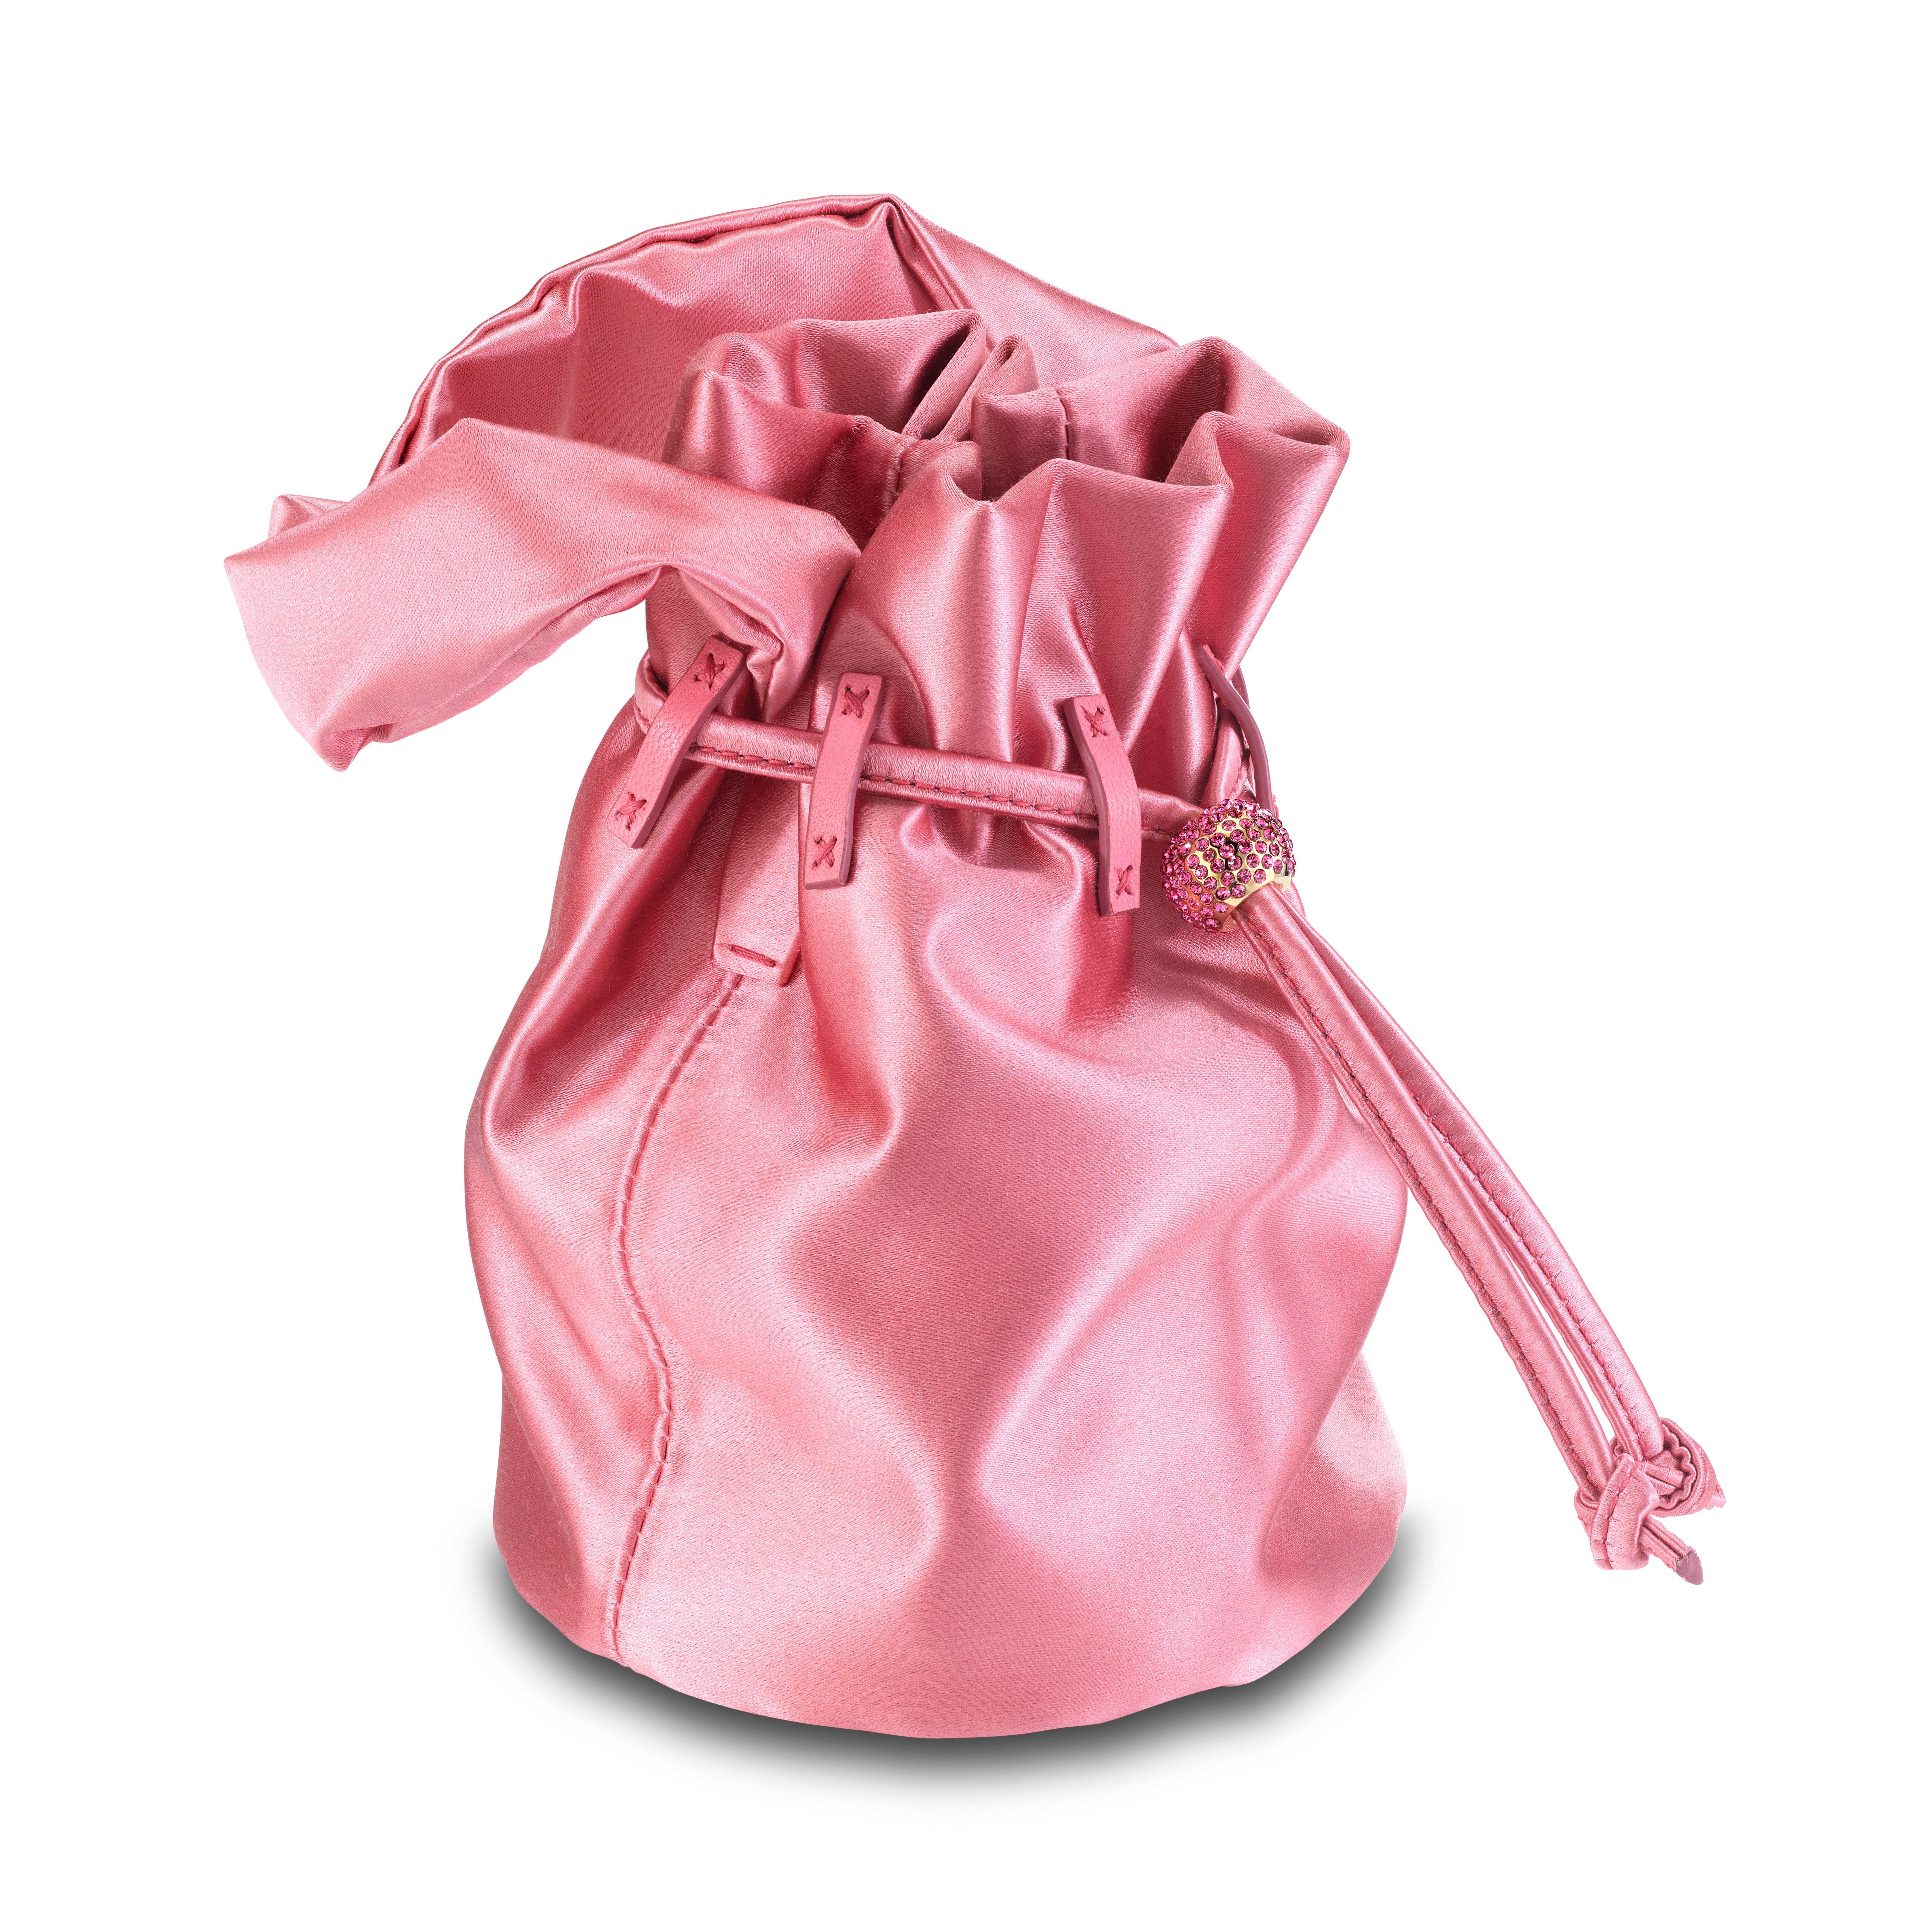 The Grace Mini is featured in our Bubblegum satin. This soft pouch has a satin handle and drawstring closure. The closure is embellished with Swarovski crystals and gold hardware. It fits the large iPhone, has interior card slots and features our